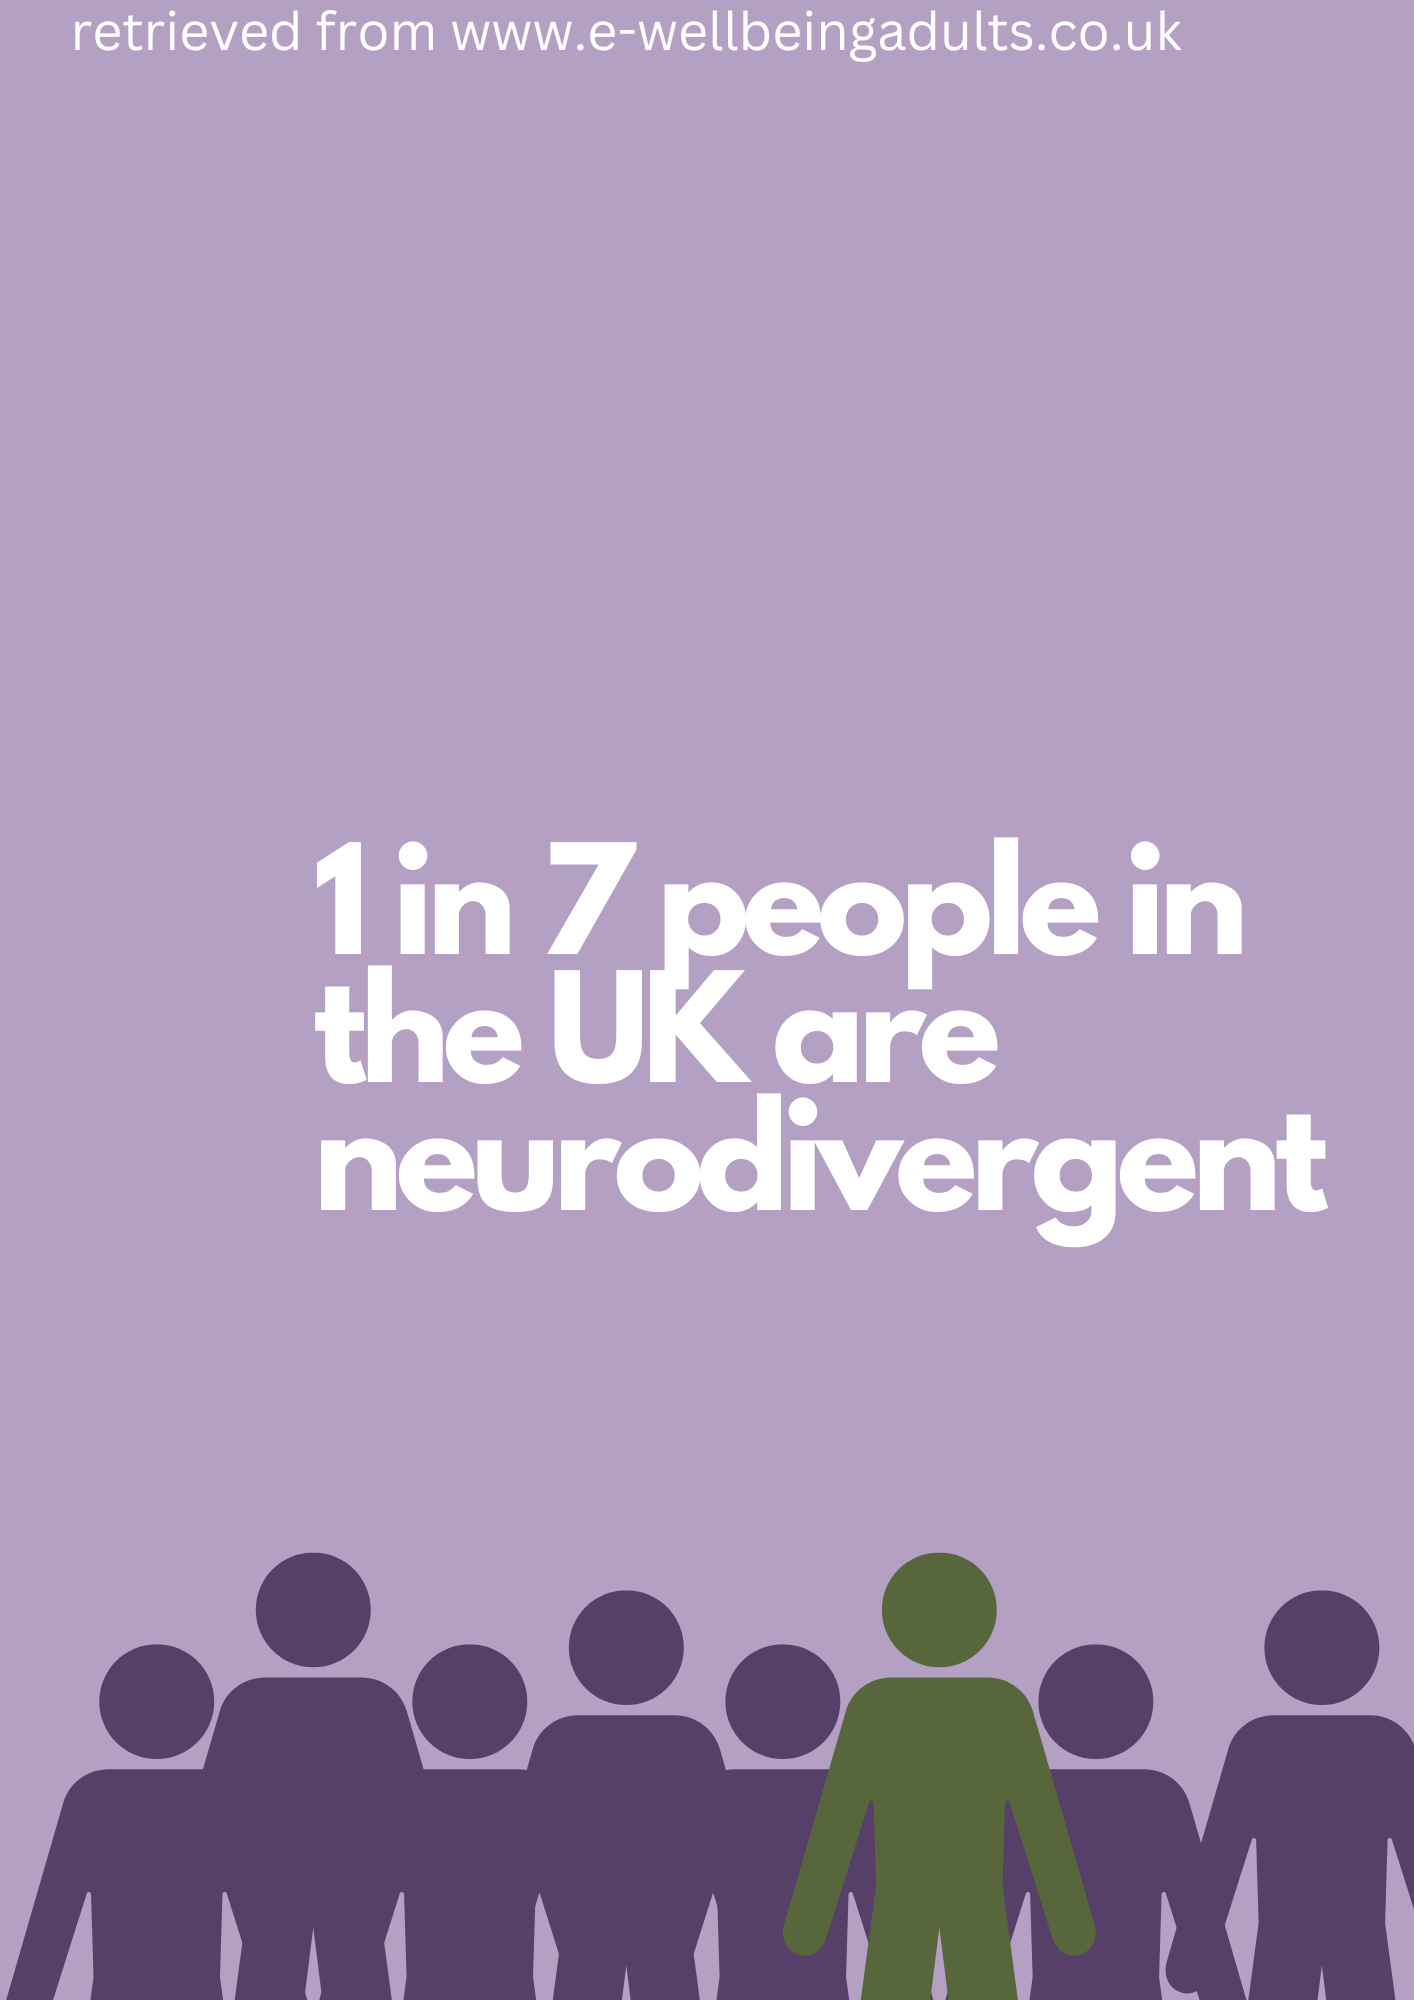 1 in 7 people in the UK are neurodivergent